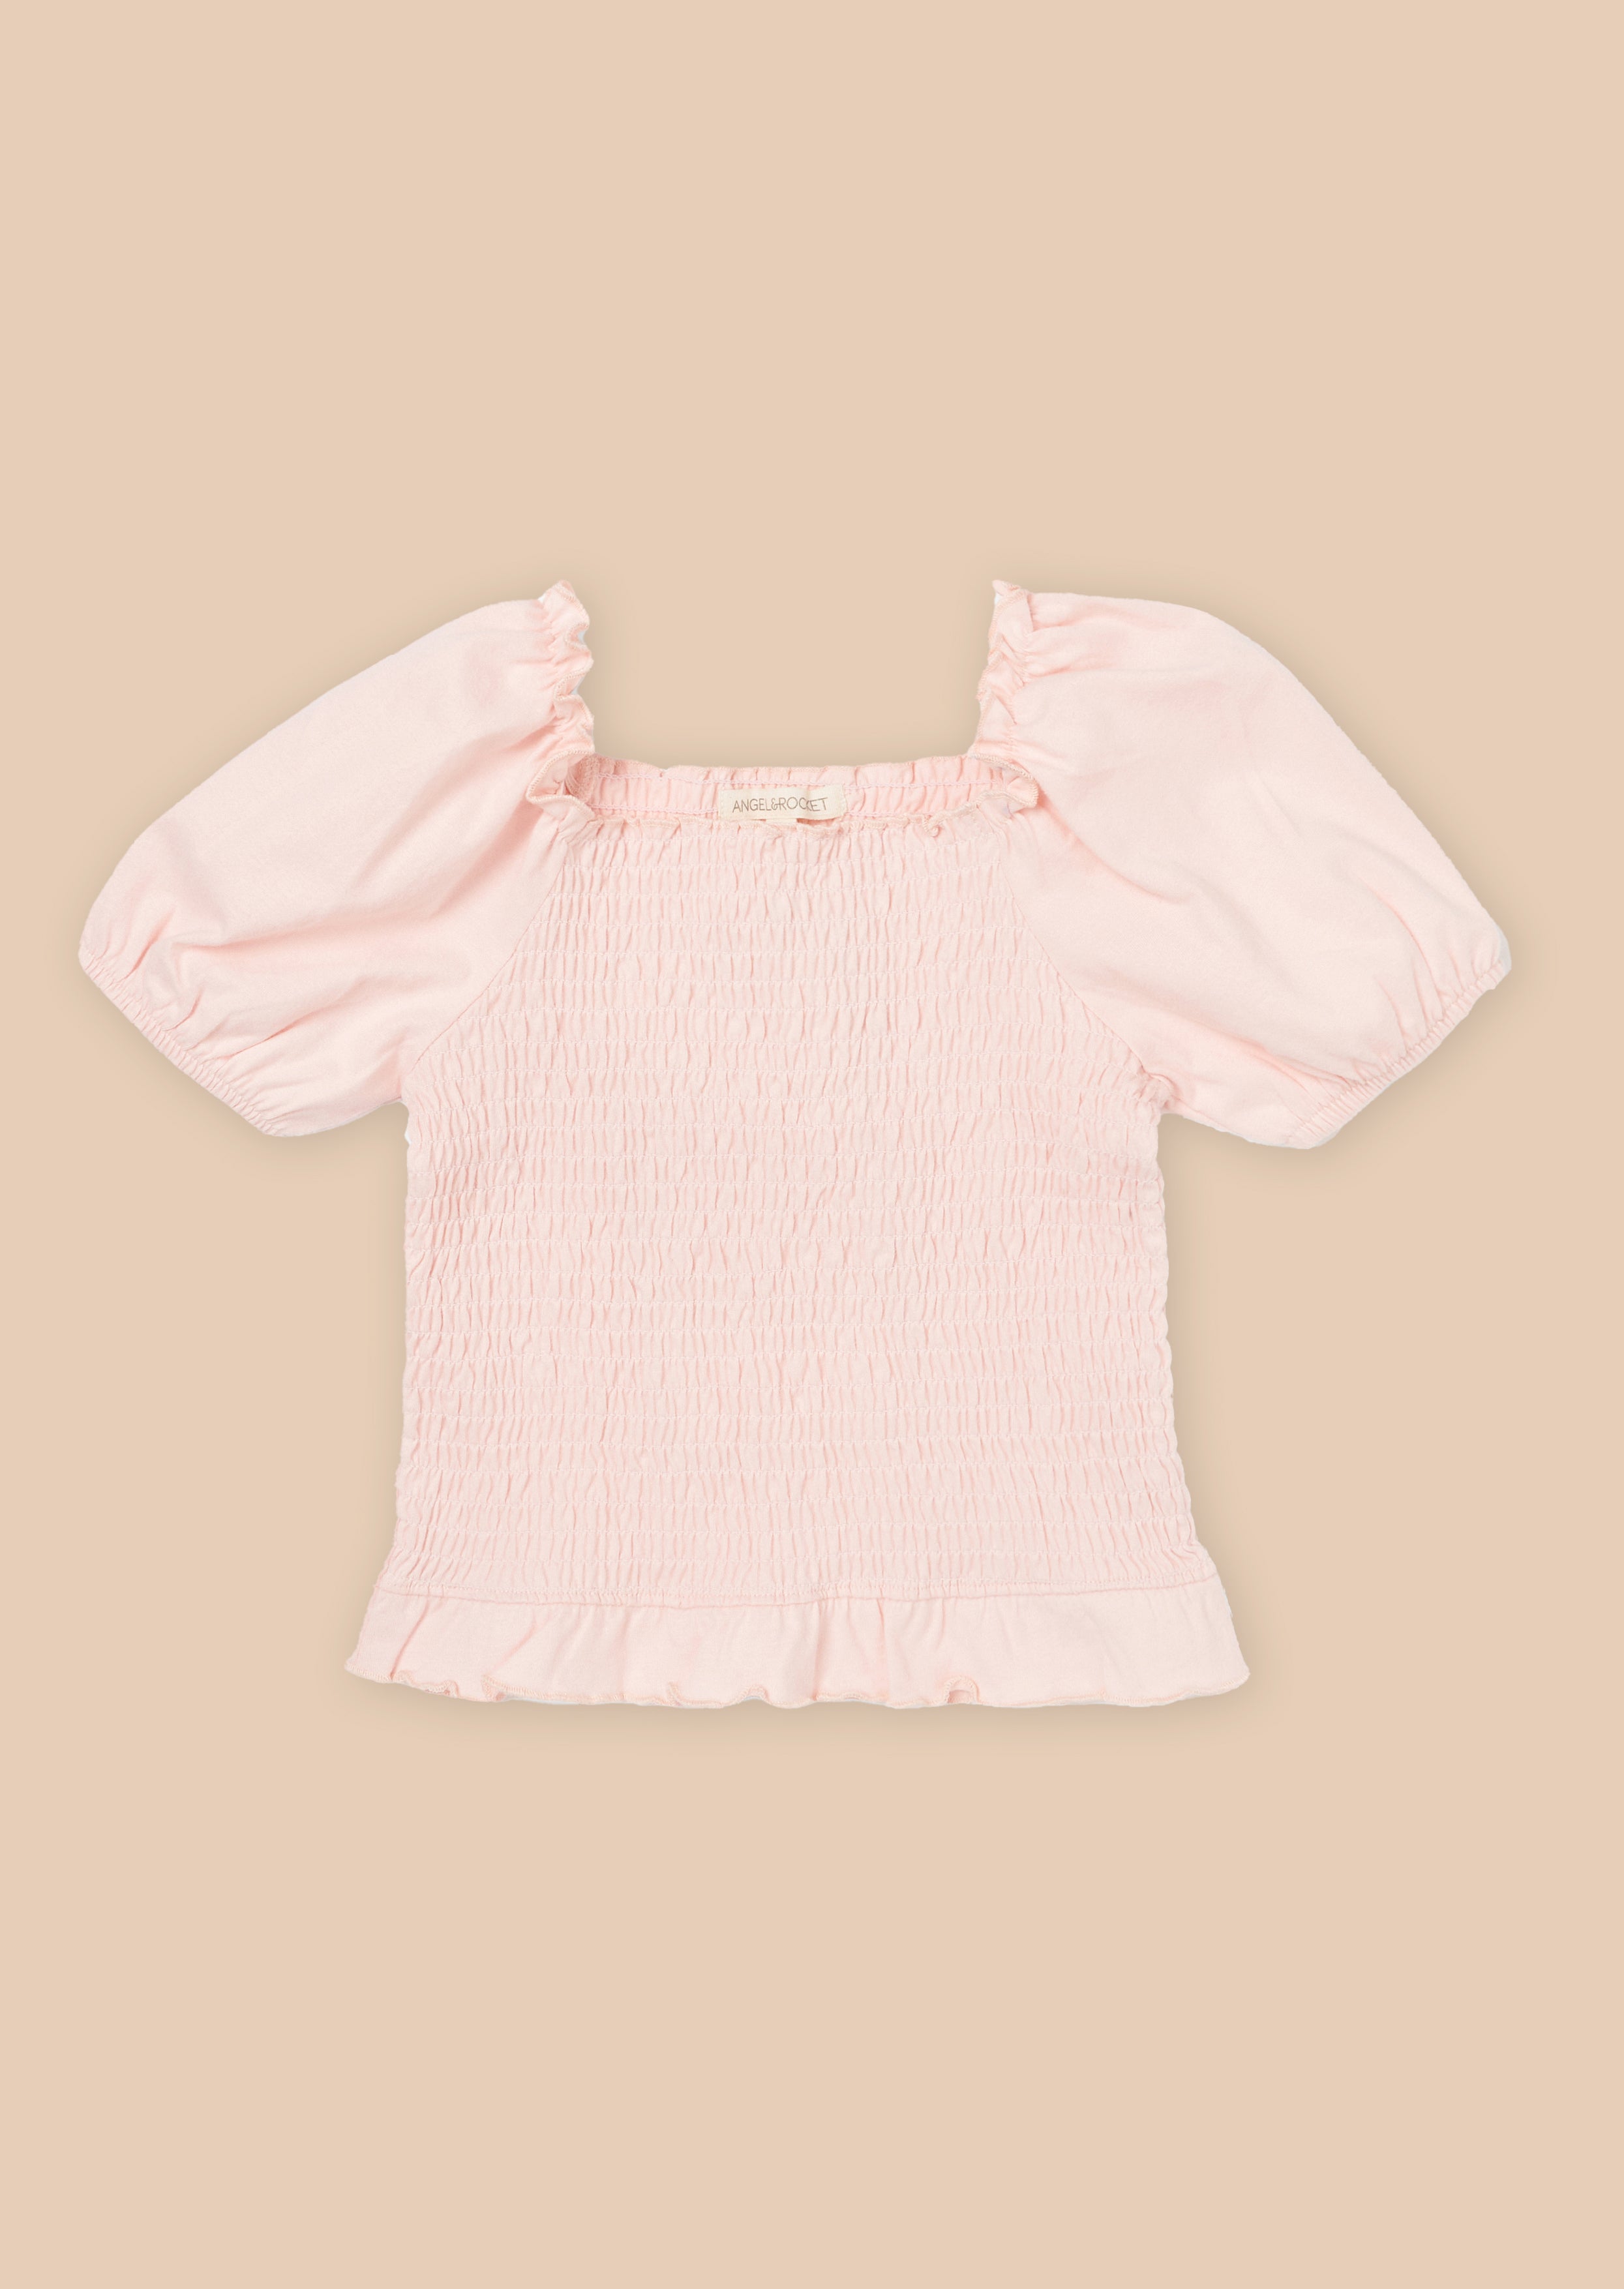 Girls Solid Pink Cotton Top with Puff Sleeves